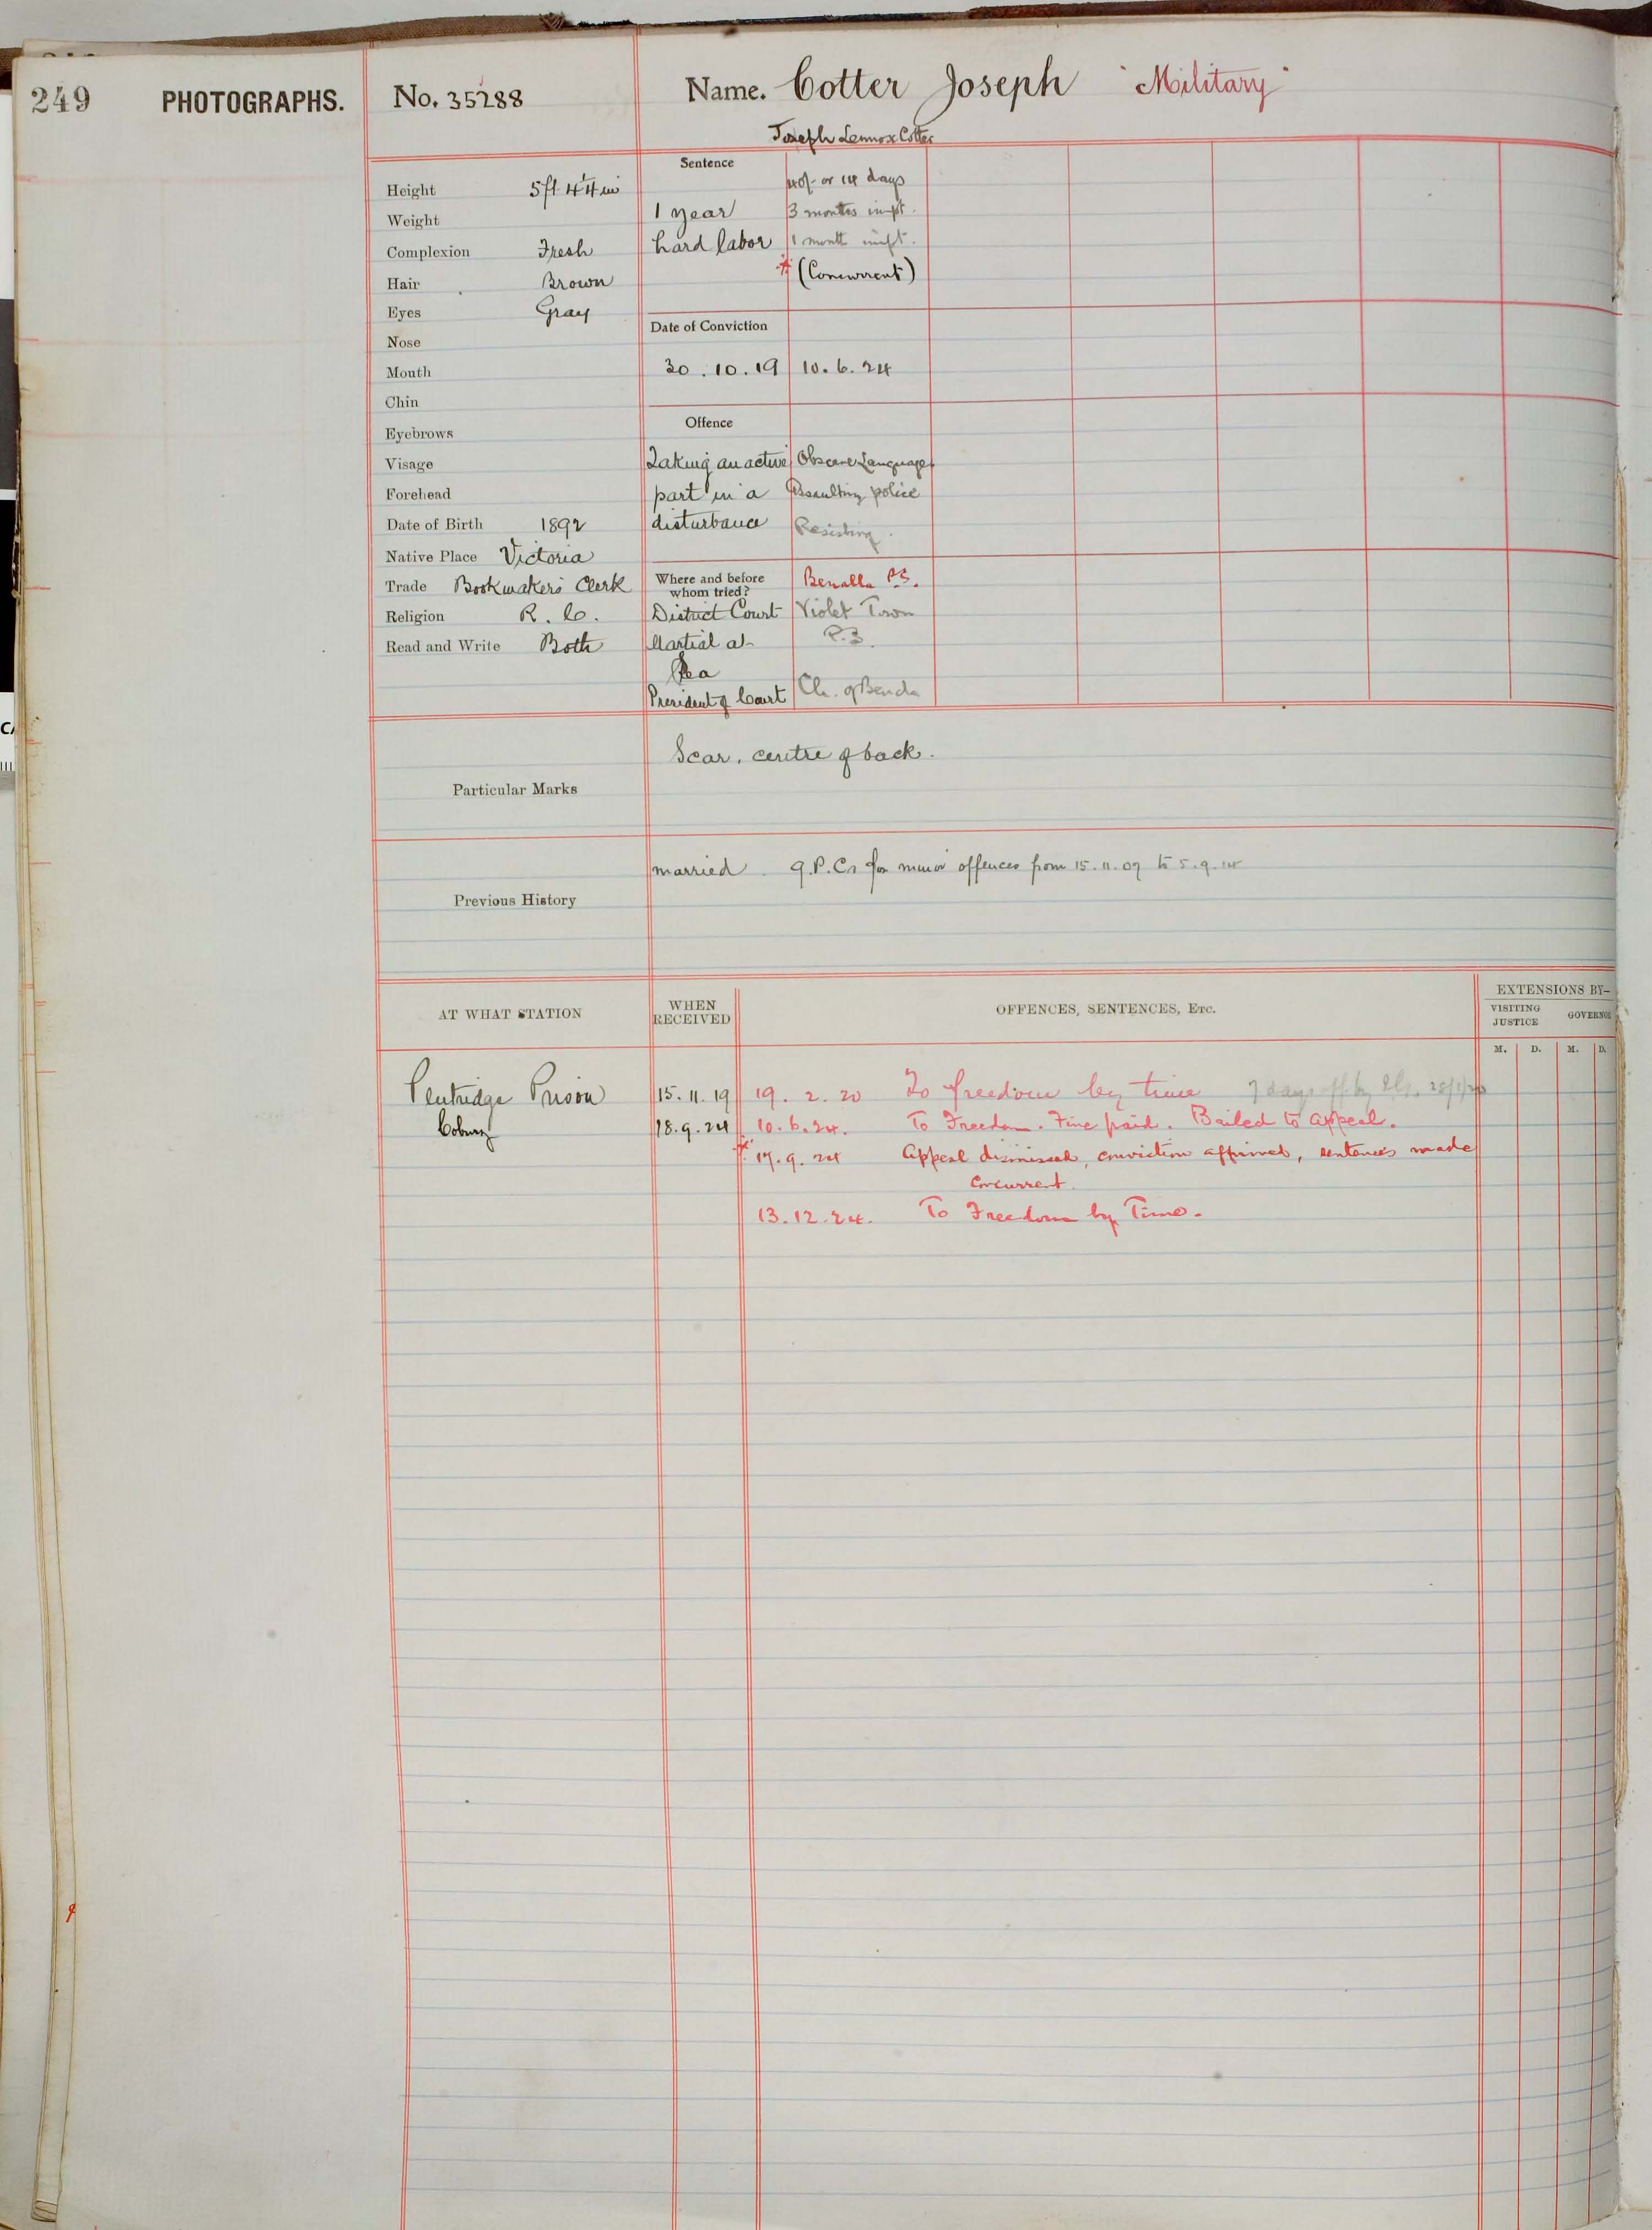 A sheet of paper that says 'cotter joseph' at the top listing his convictions